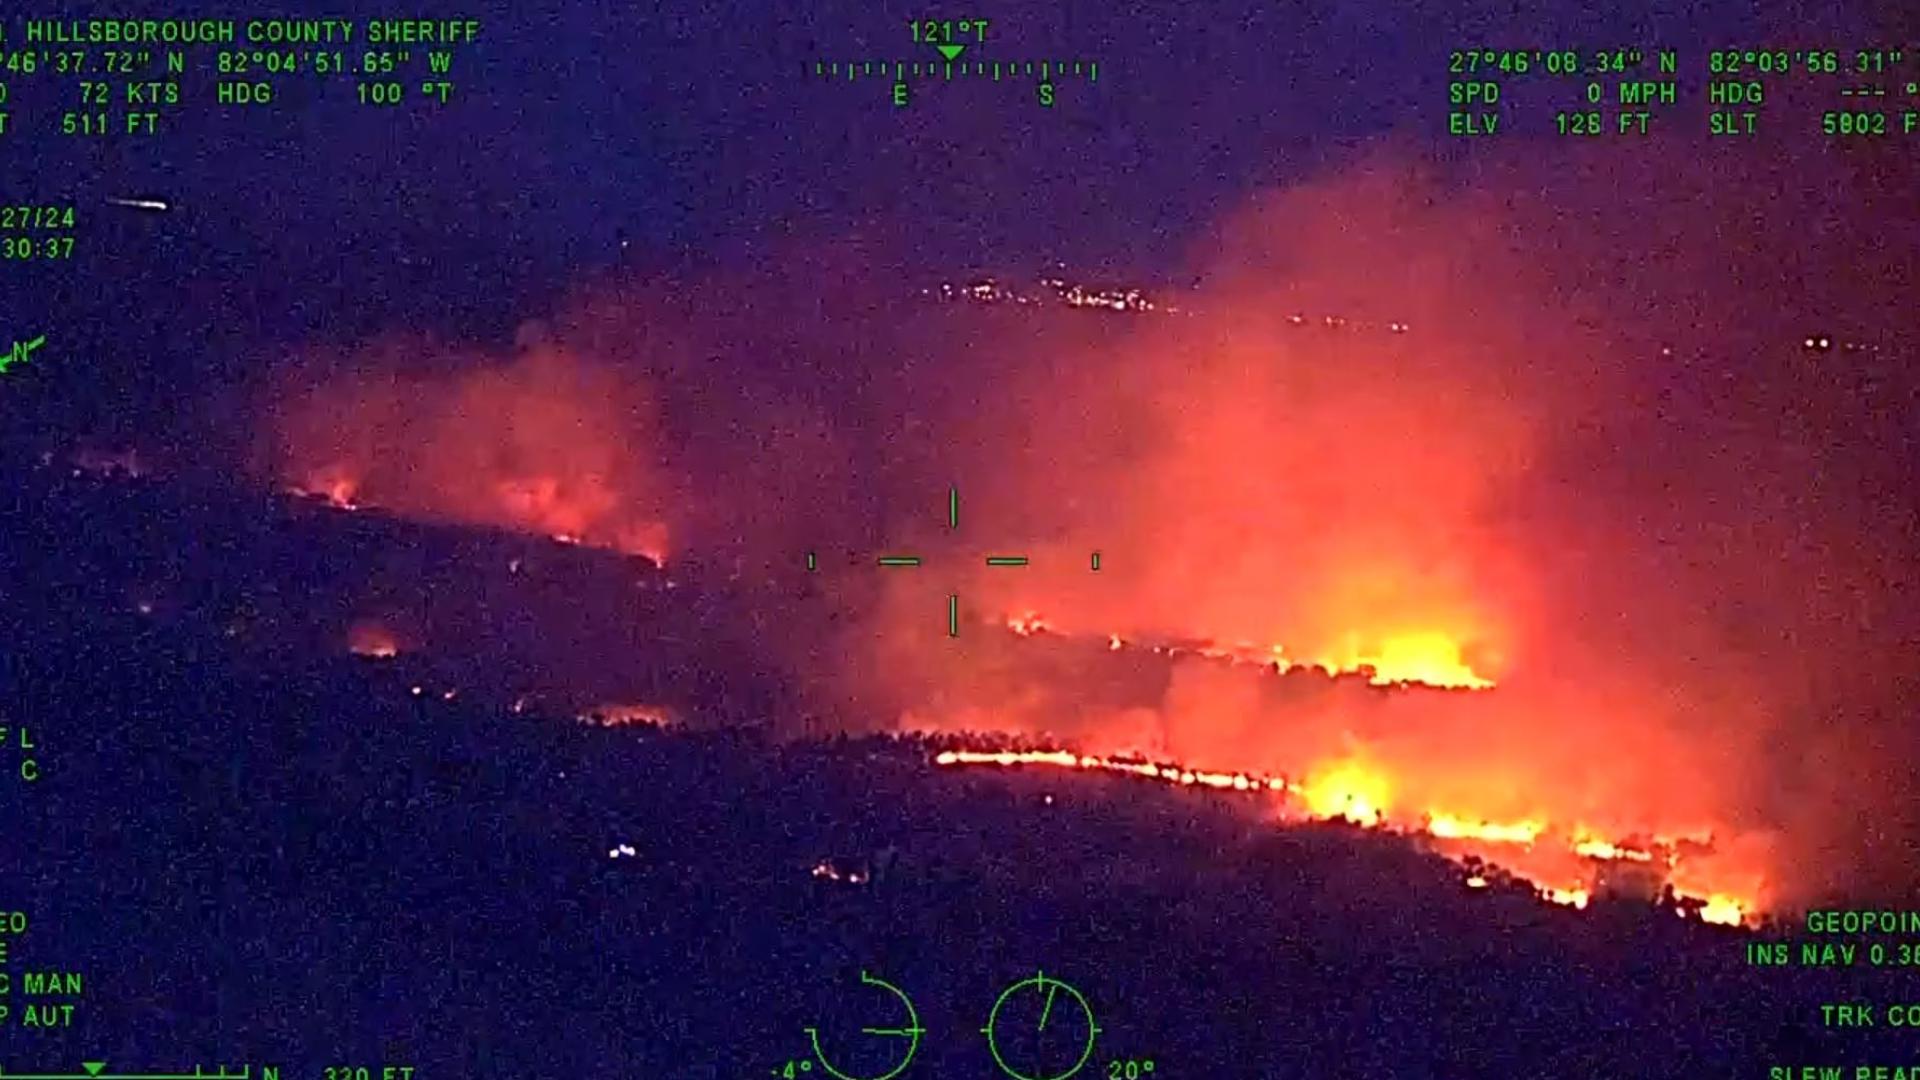 Video from a Hillsborough County Sheriff’s Office aerial unit Saturday night shows the orange flames of a brush fire near the Alafia River State Park.